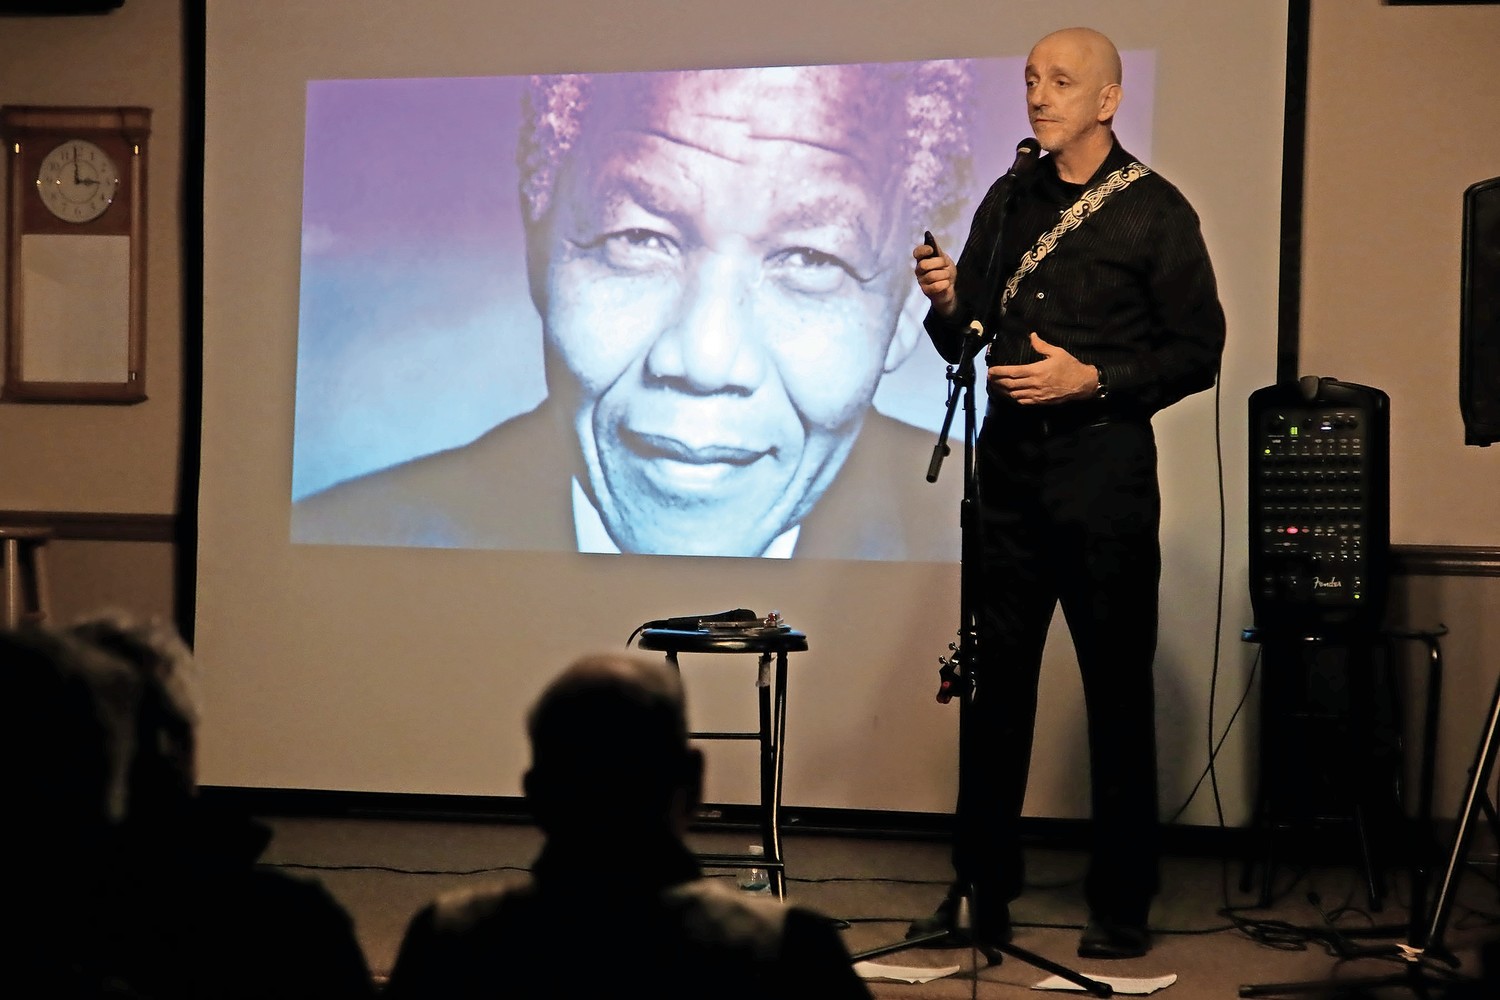 During his performance, Toby Tobias talked about Nelson  Mandela, a South African anti-apartheid revolutionary, political leaderand philanthropist, who served as President of South Africa from 1994 to 1999. 